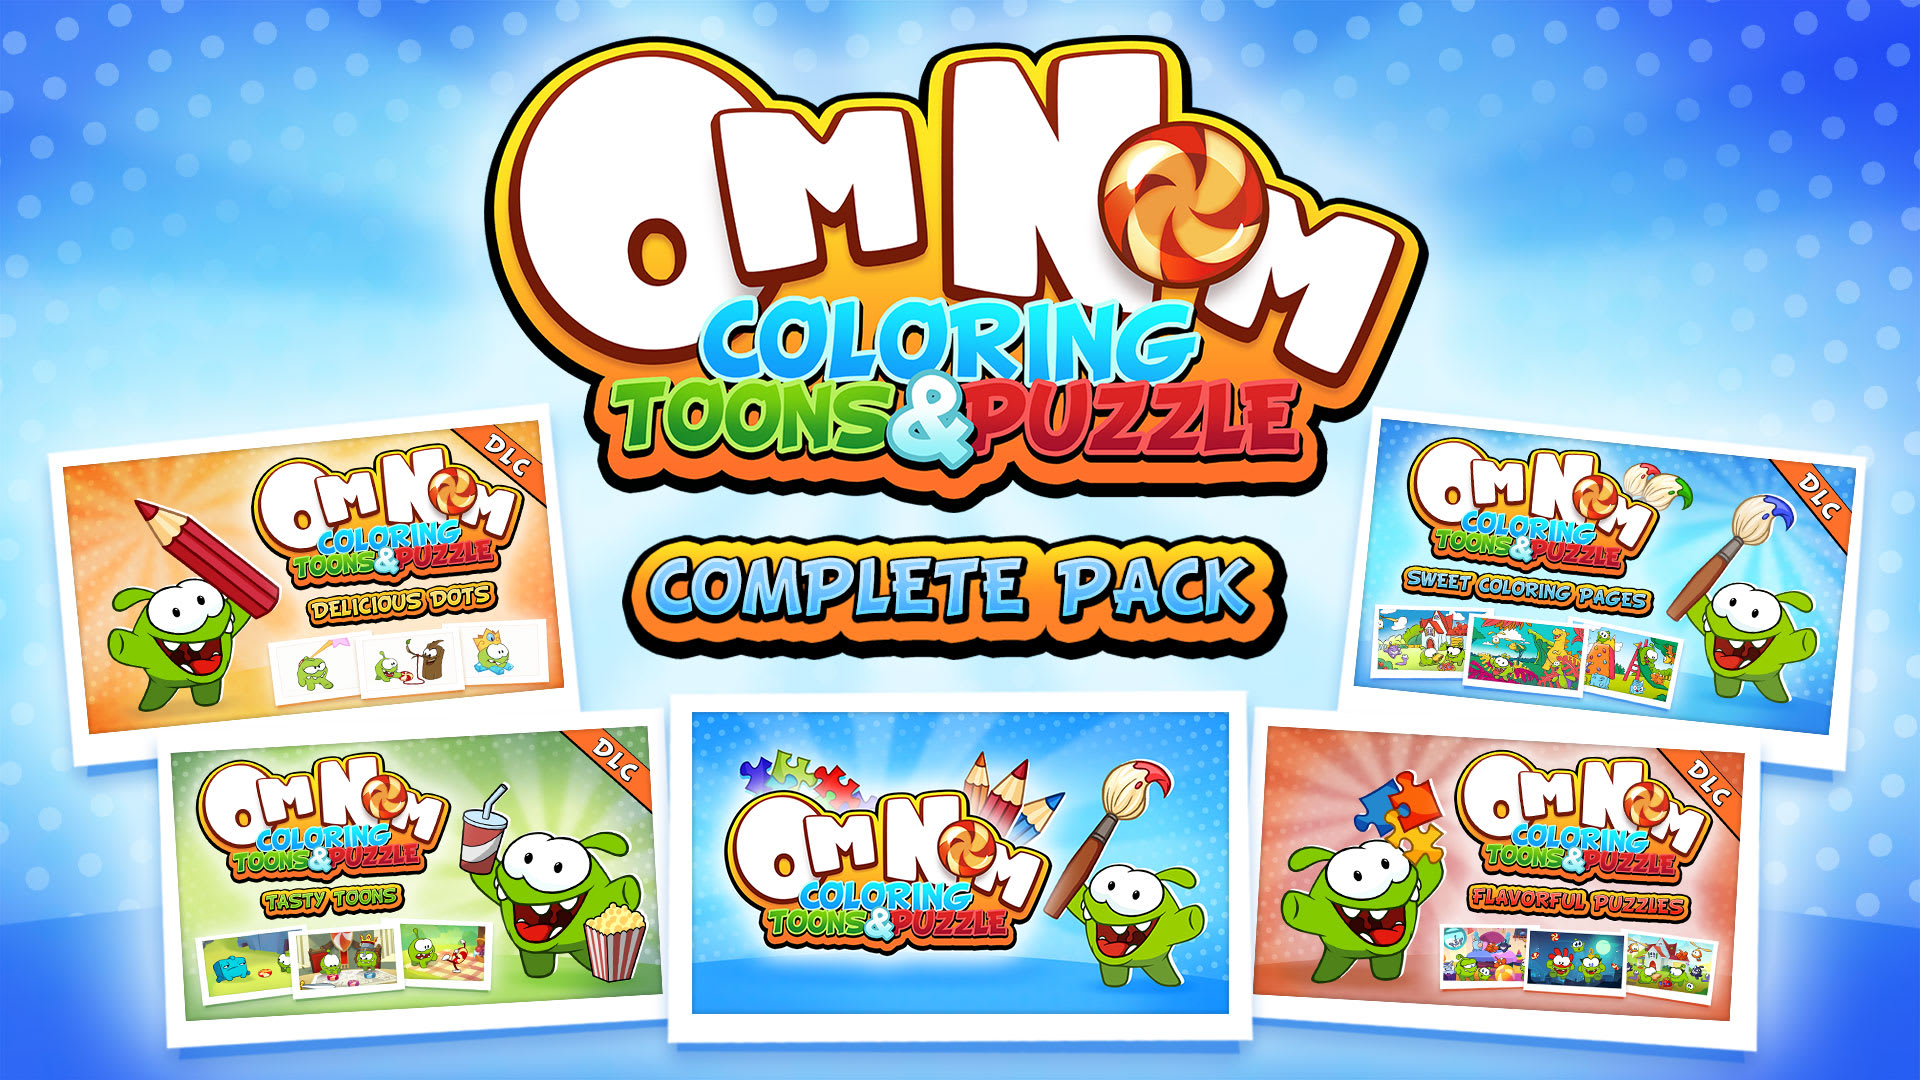 Om Nom: Coloring, Toons & Puzzle - Complete Pack